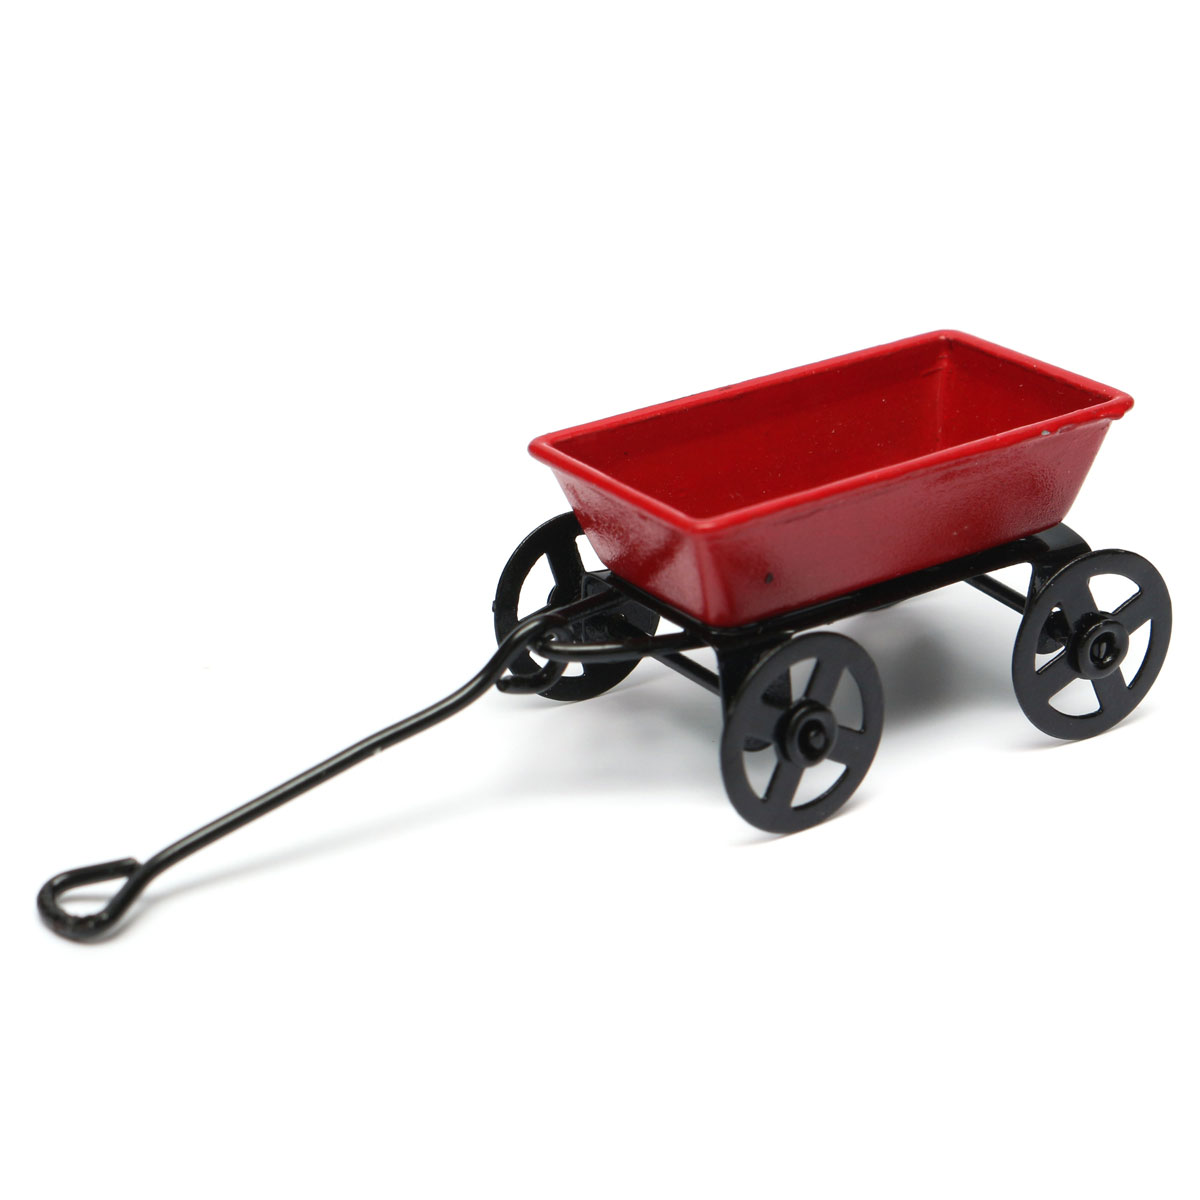 Dollhouse-Metal-Miniature-Toy-Red-Small-Pulling-Cart-Garden-Furniture-Accessories-1016288-1